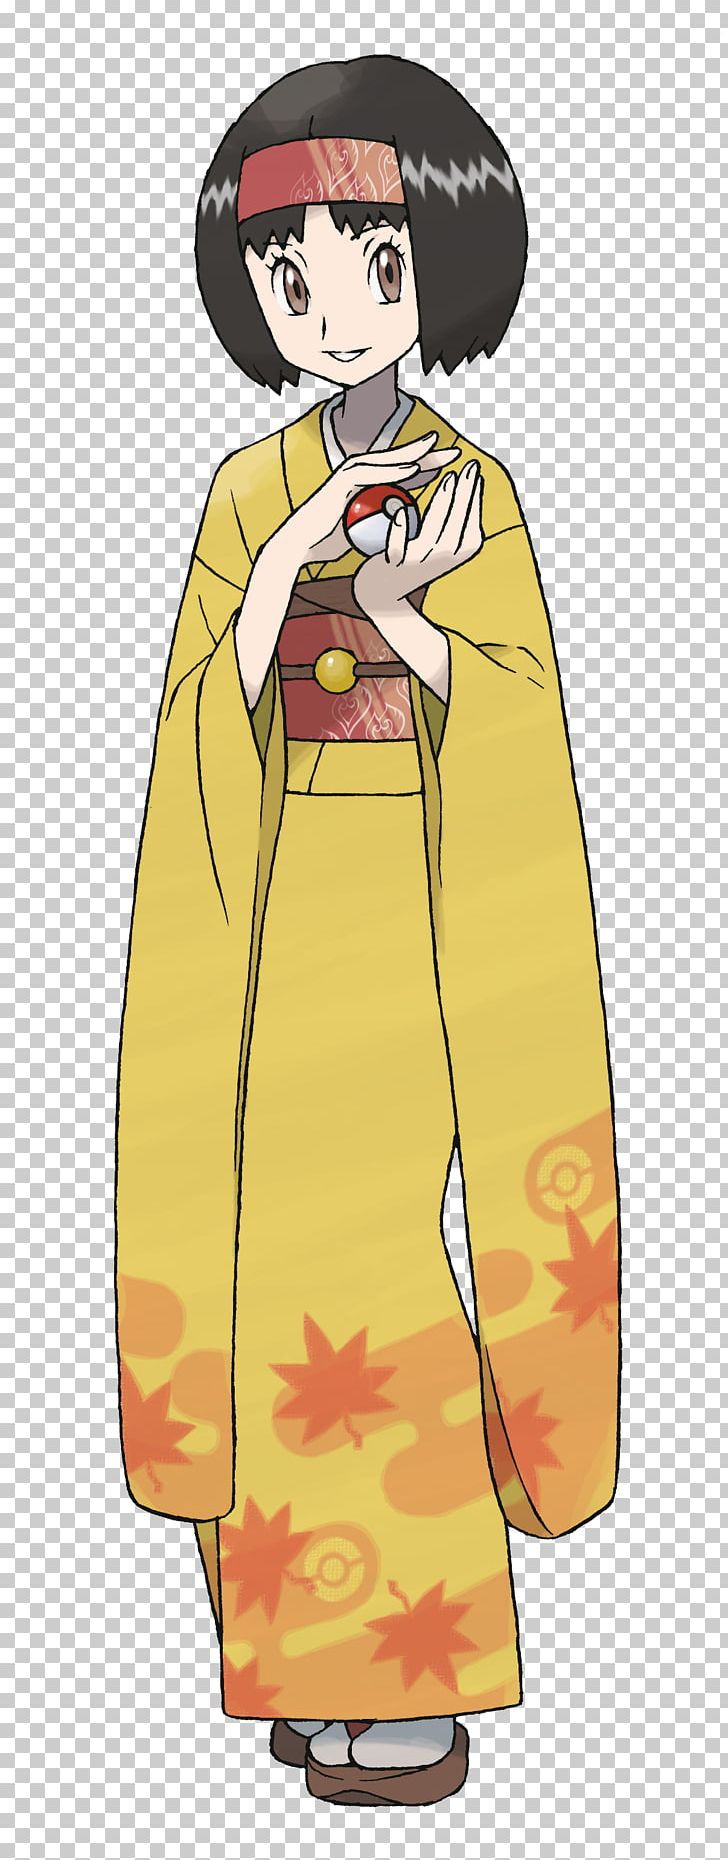 Pokémon HeartGold And SoulSilver Pokémon Red And Blue Pokémon Omega Ruby And Alpha Sapphire Erika PNG, Clipart, Fashion Illustration, Fictional Character, Girl, Kimono, Koga Free PNG Download